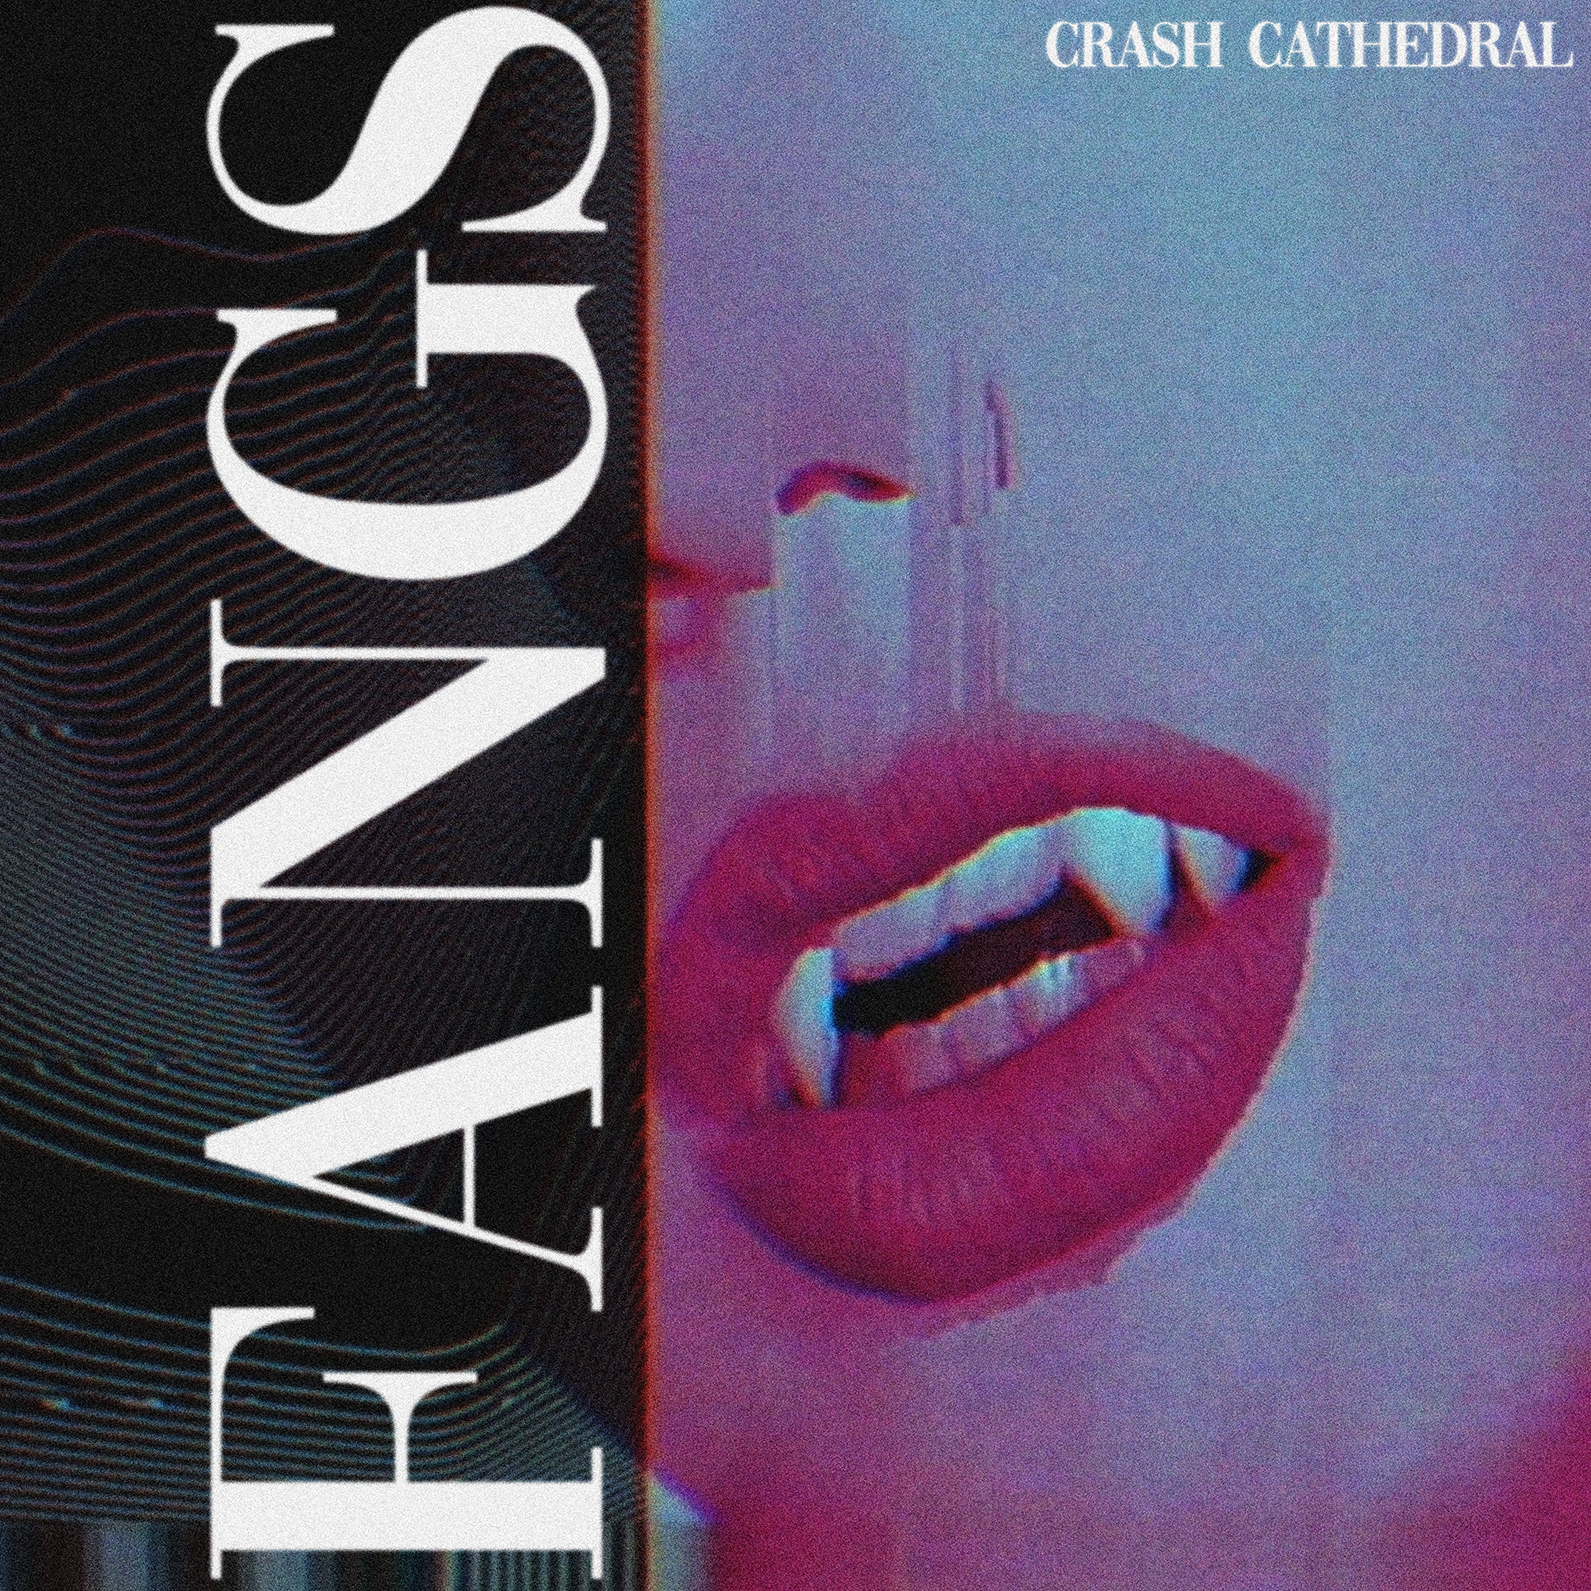 TRACK PREMIERE: Crash Cathedral – Fangs 